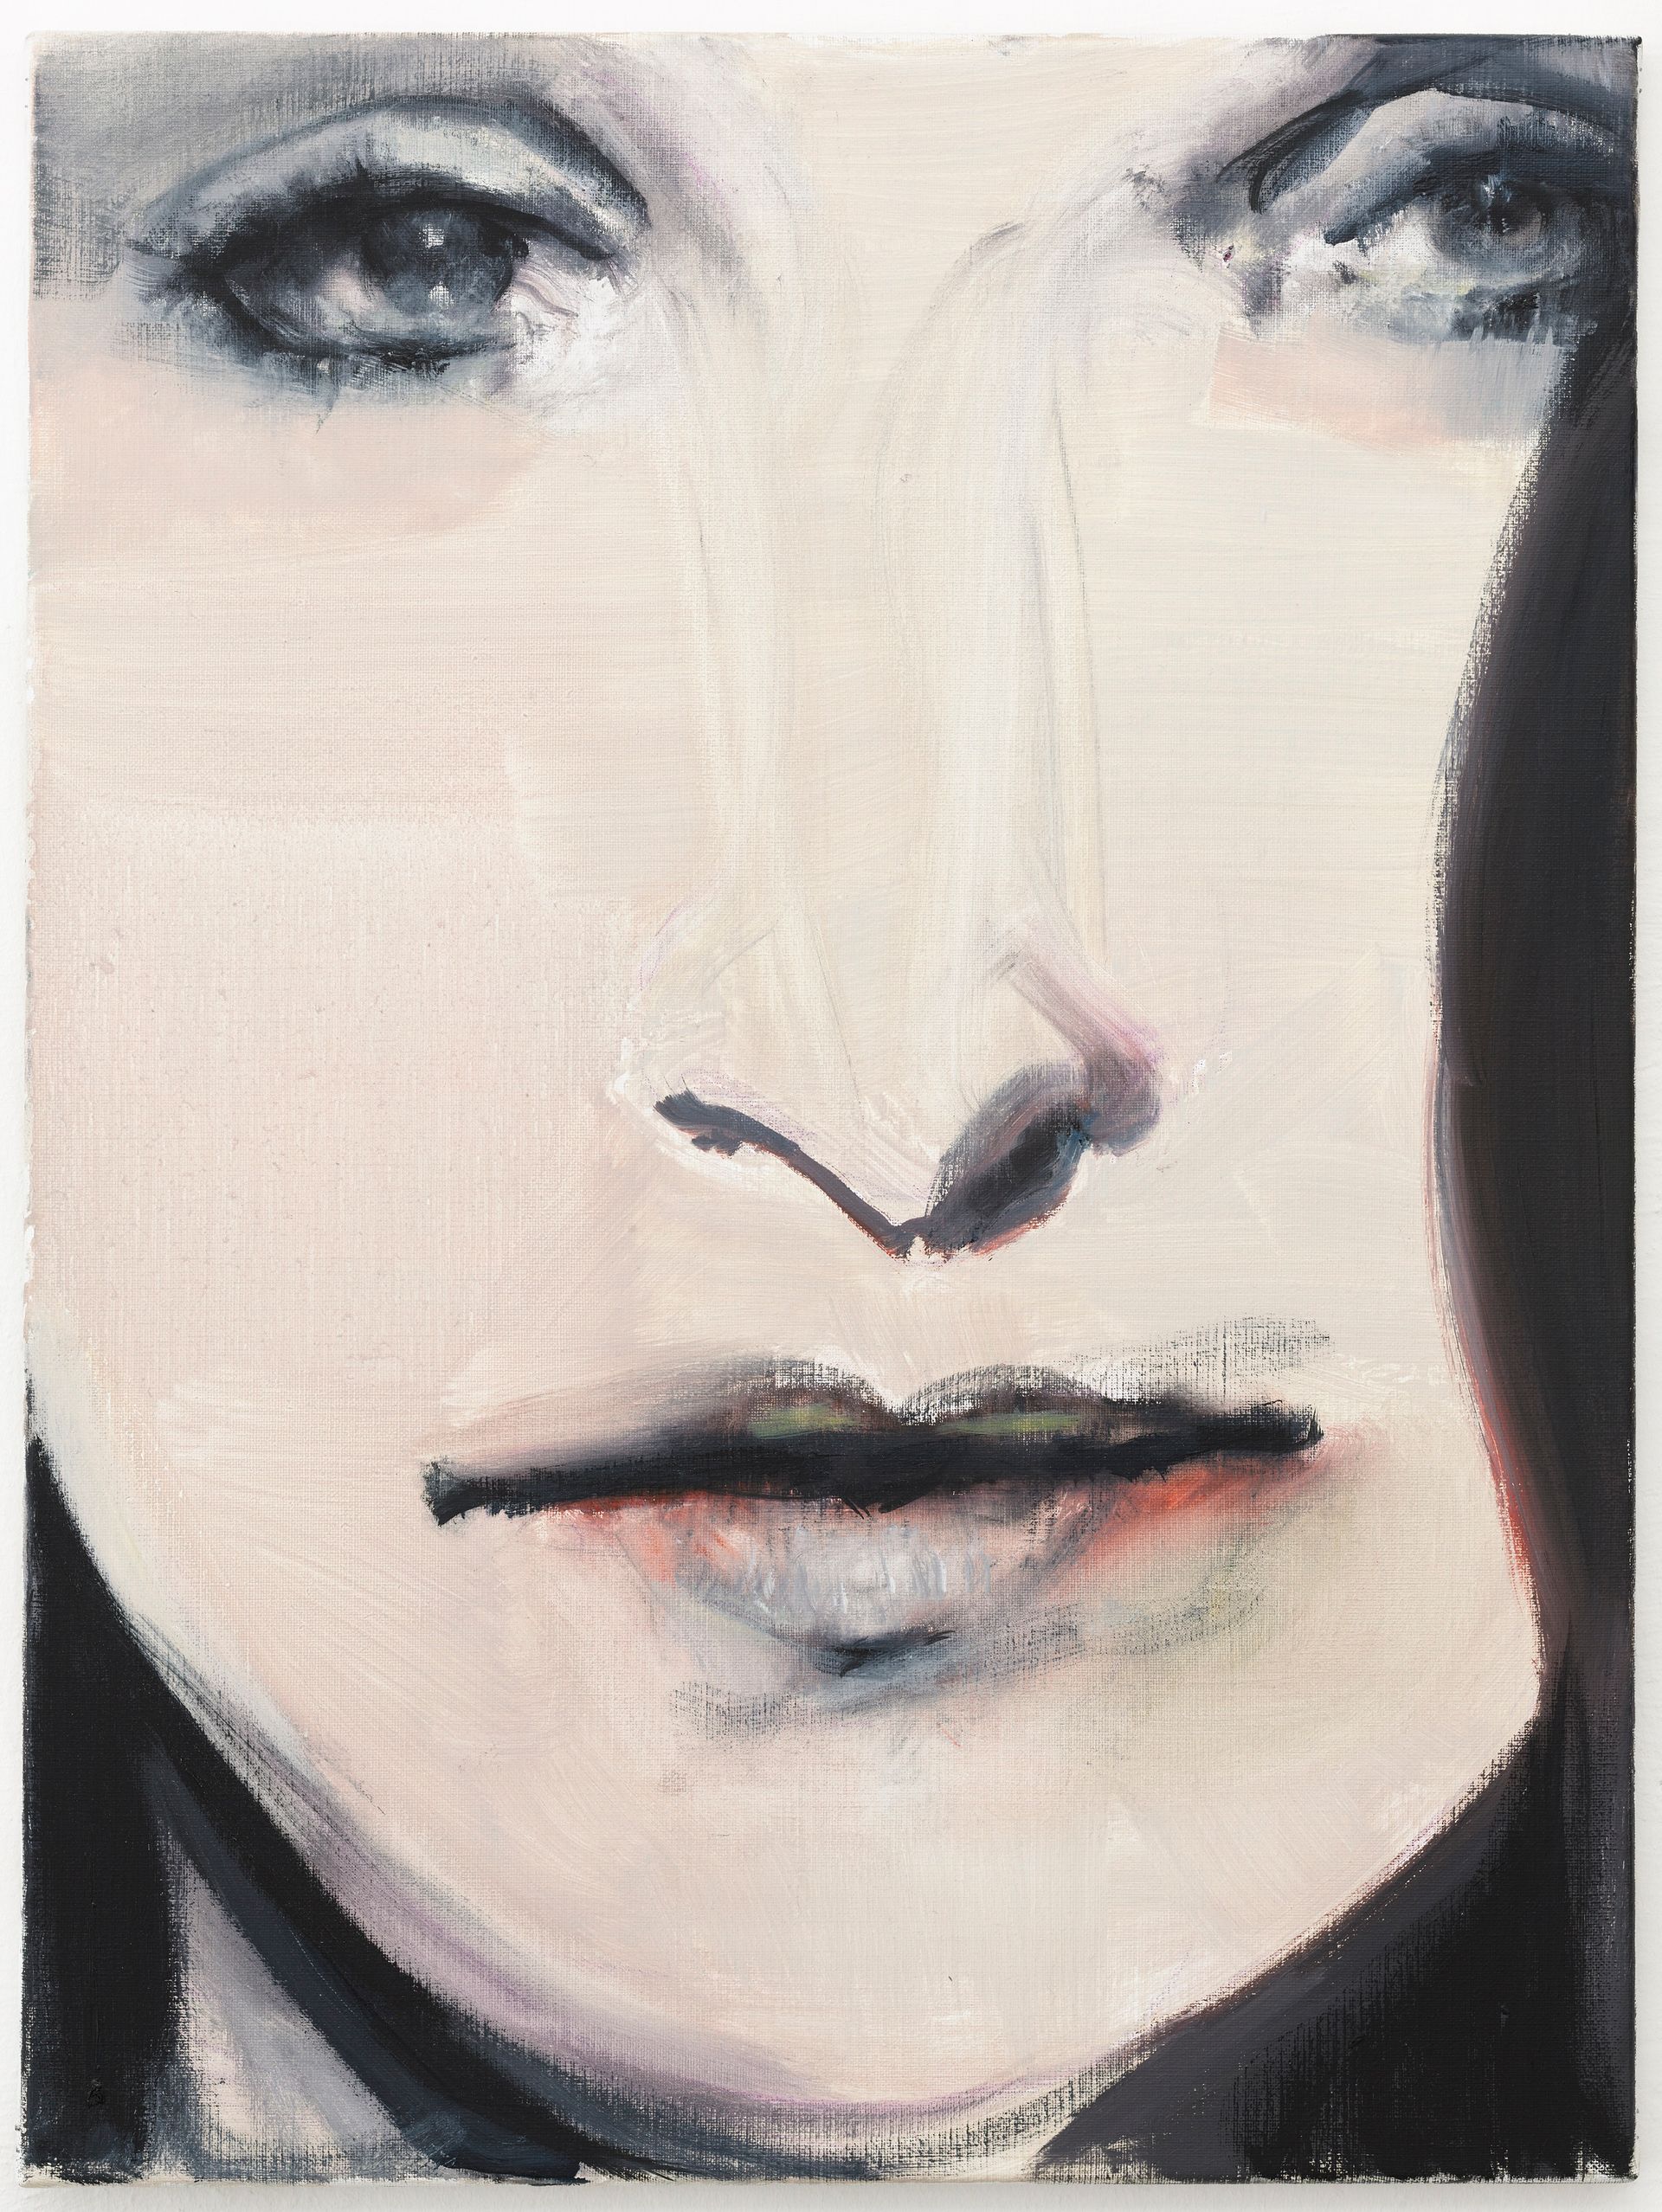 Marlene Dumas, Dora Maar (The Woman Who saw Picasso cry), 2008, huile sur toile, collection particulière. Courtesy Zeno X Gallery, Anvers